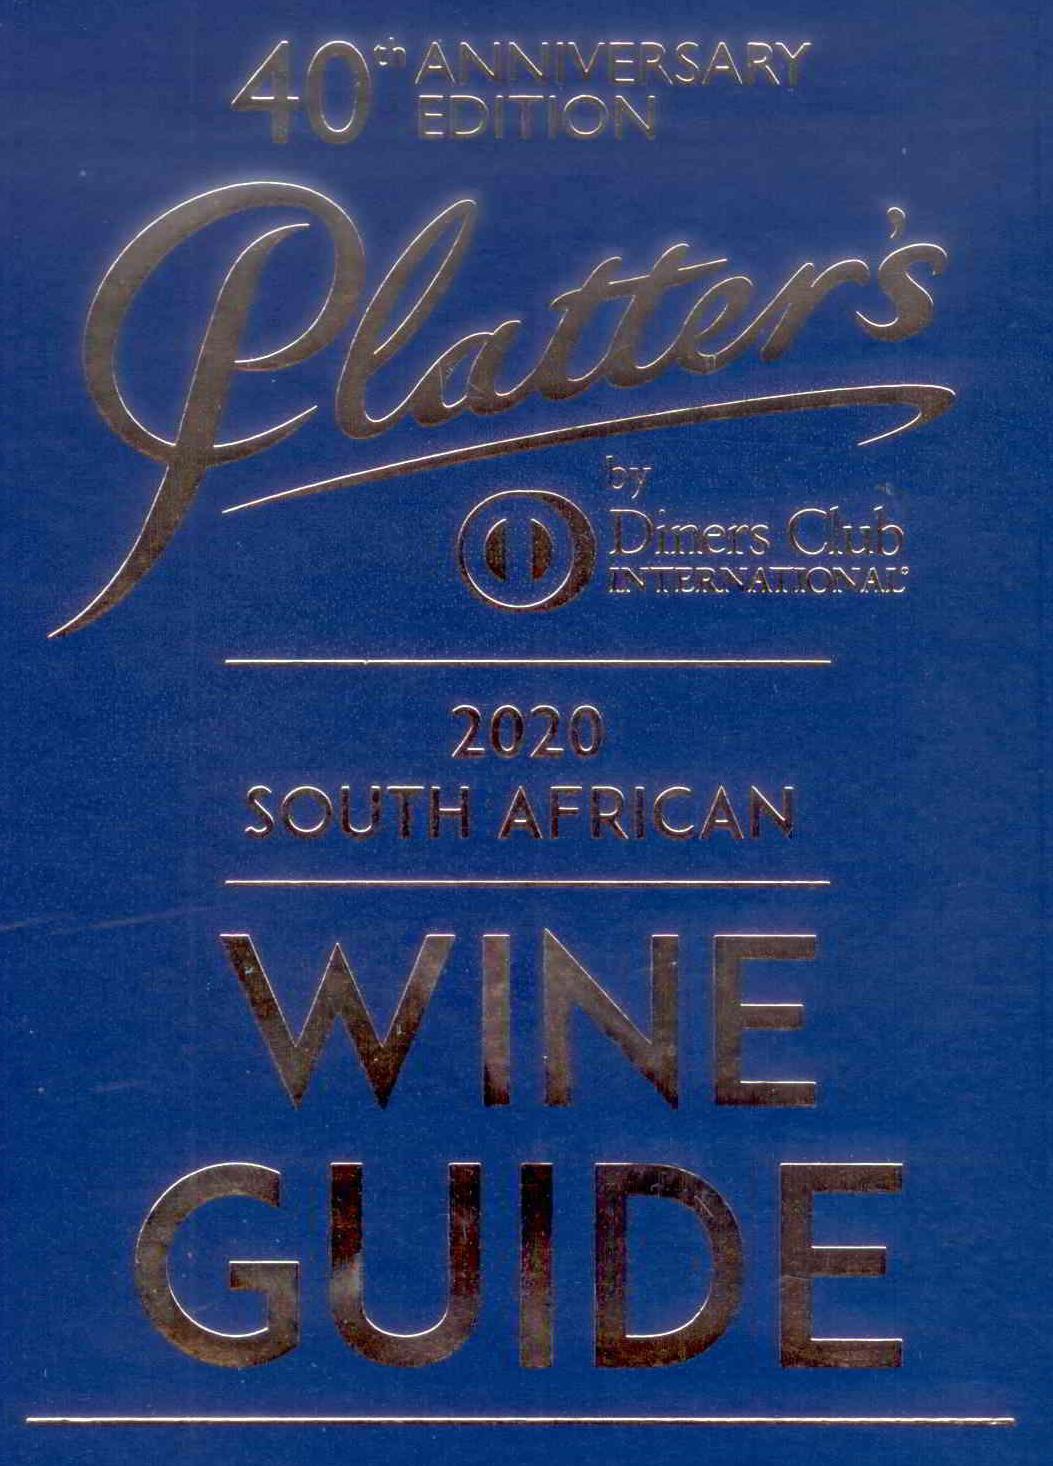 John Platter South African Wine Guide recommends Percy Tours of Hermanus for excellent wine tours of the region